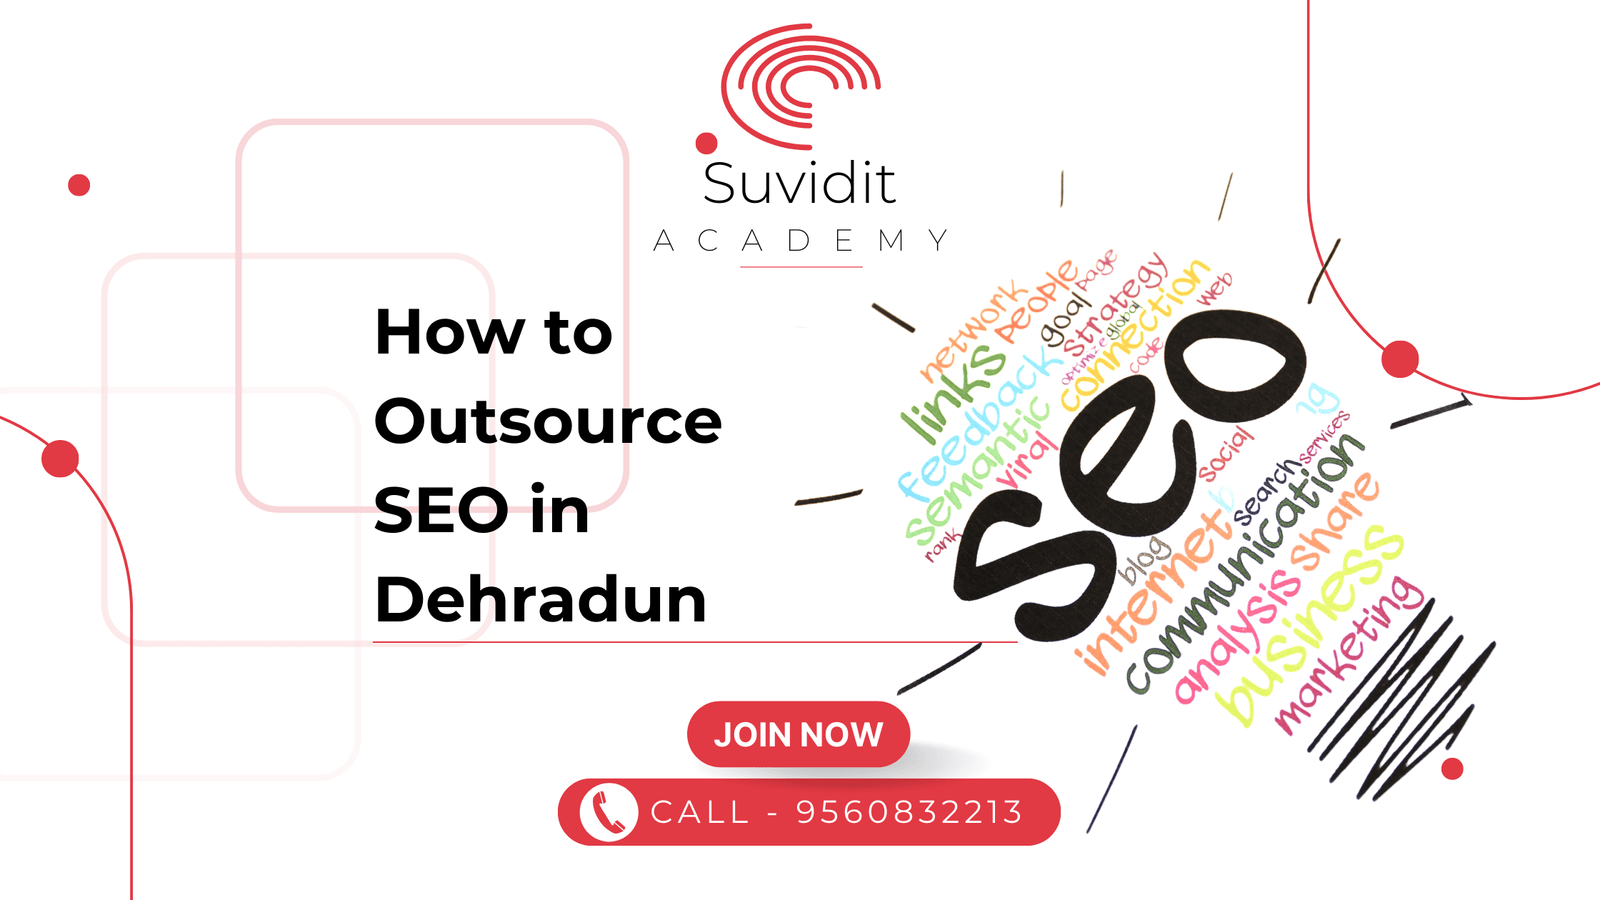 How to Outsource SEO in Dehradun